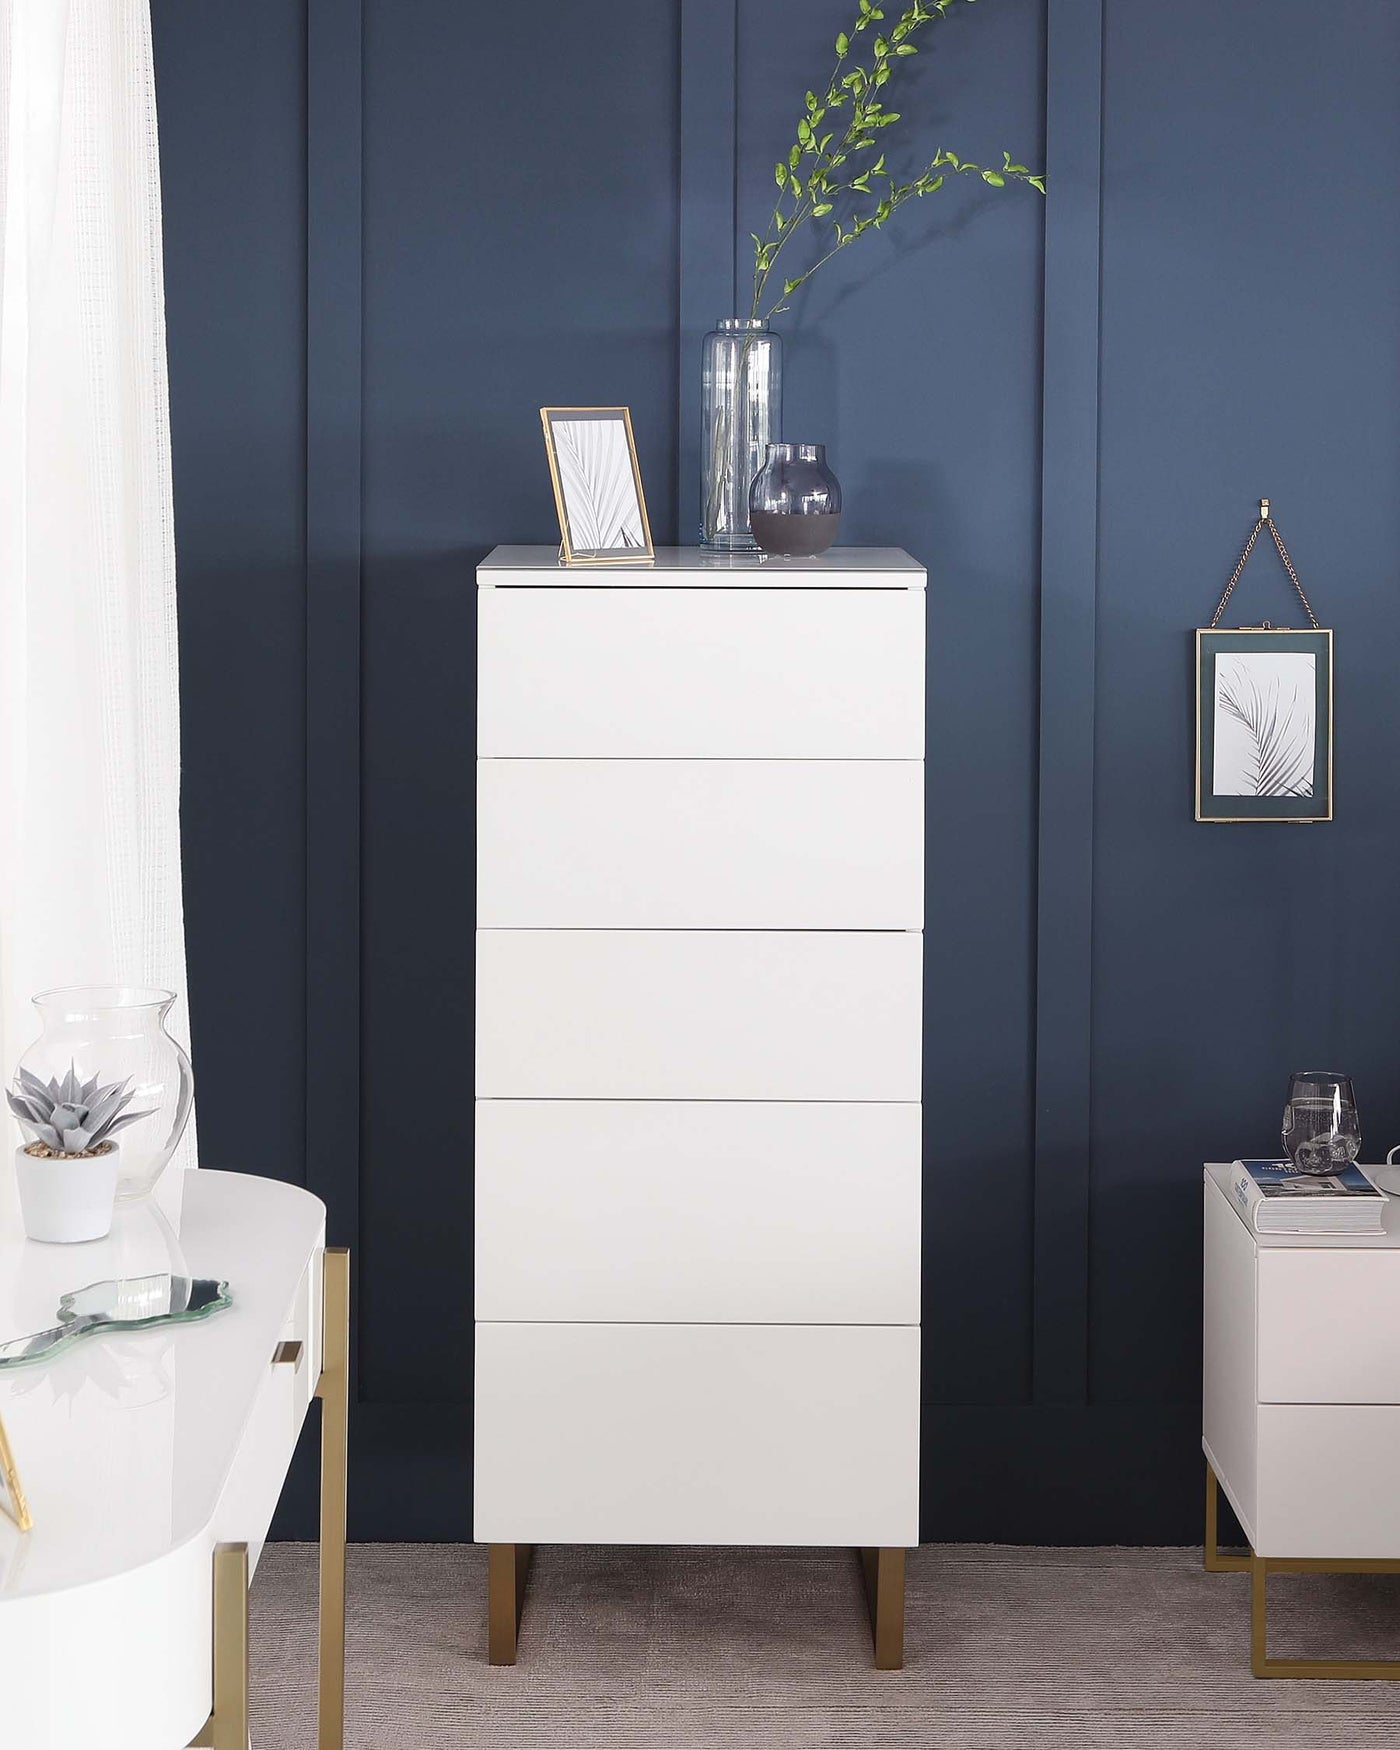 A modern white tallboy dresser with five drawers and gold-tipped legs against a dark blue wall. Decorated with a frame, a clear vase with greenery, and a dark vase on its top surface. Adjacent to it is a smaller cabinet with a similar style, partially visible on the right.